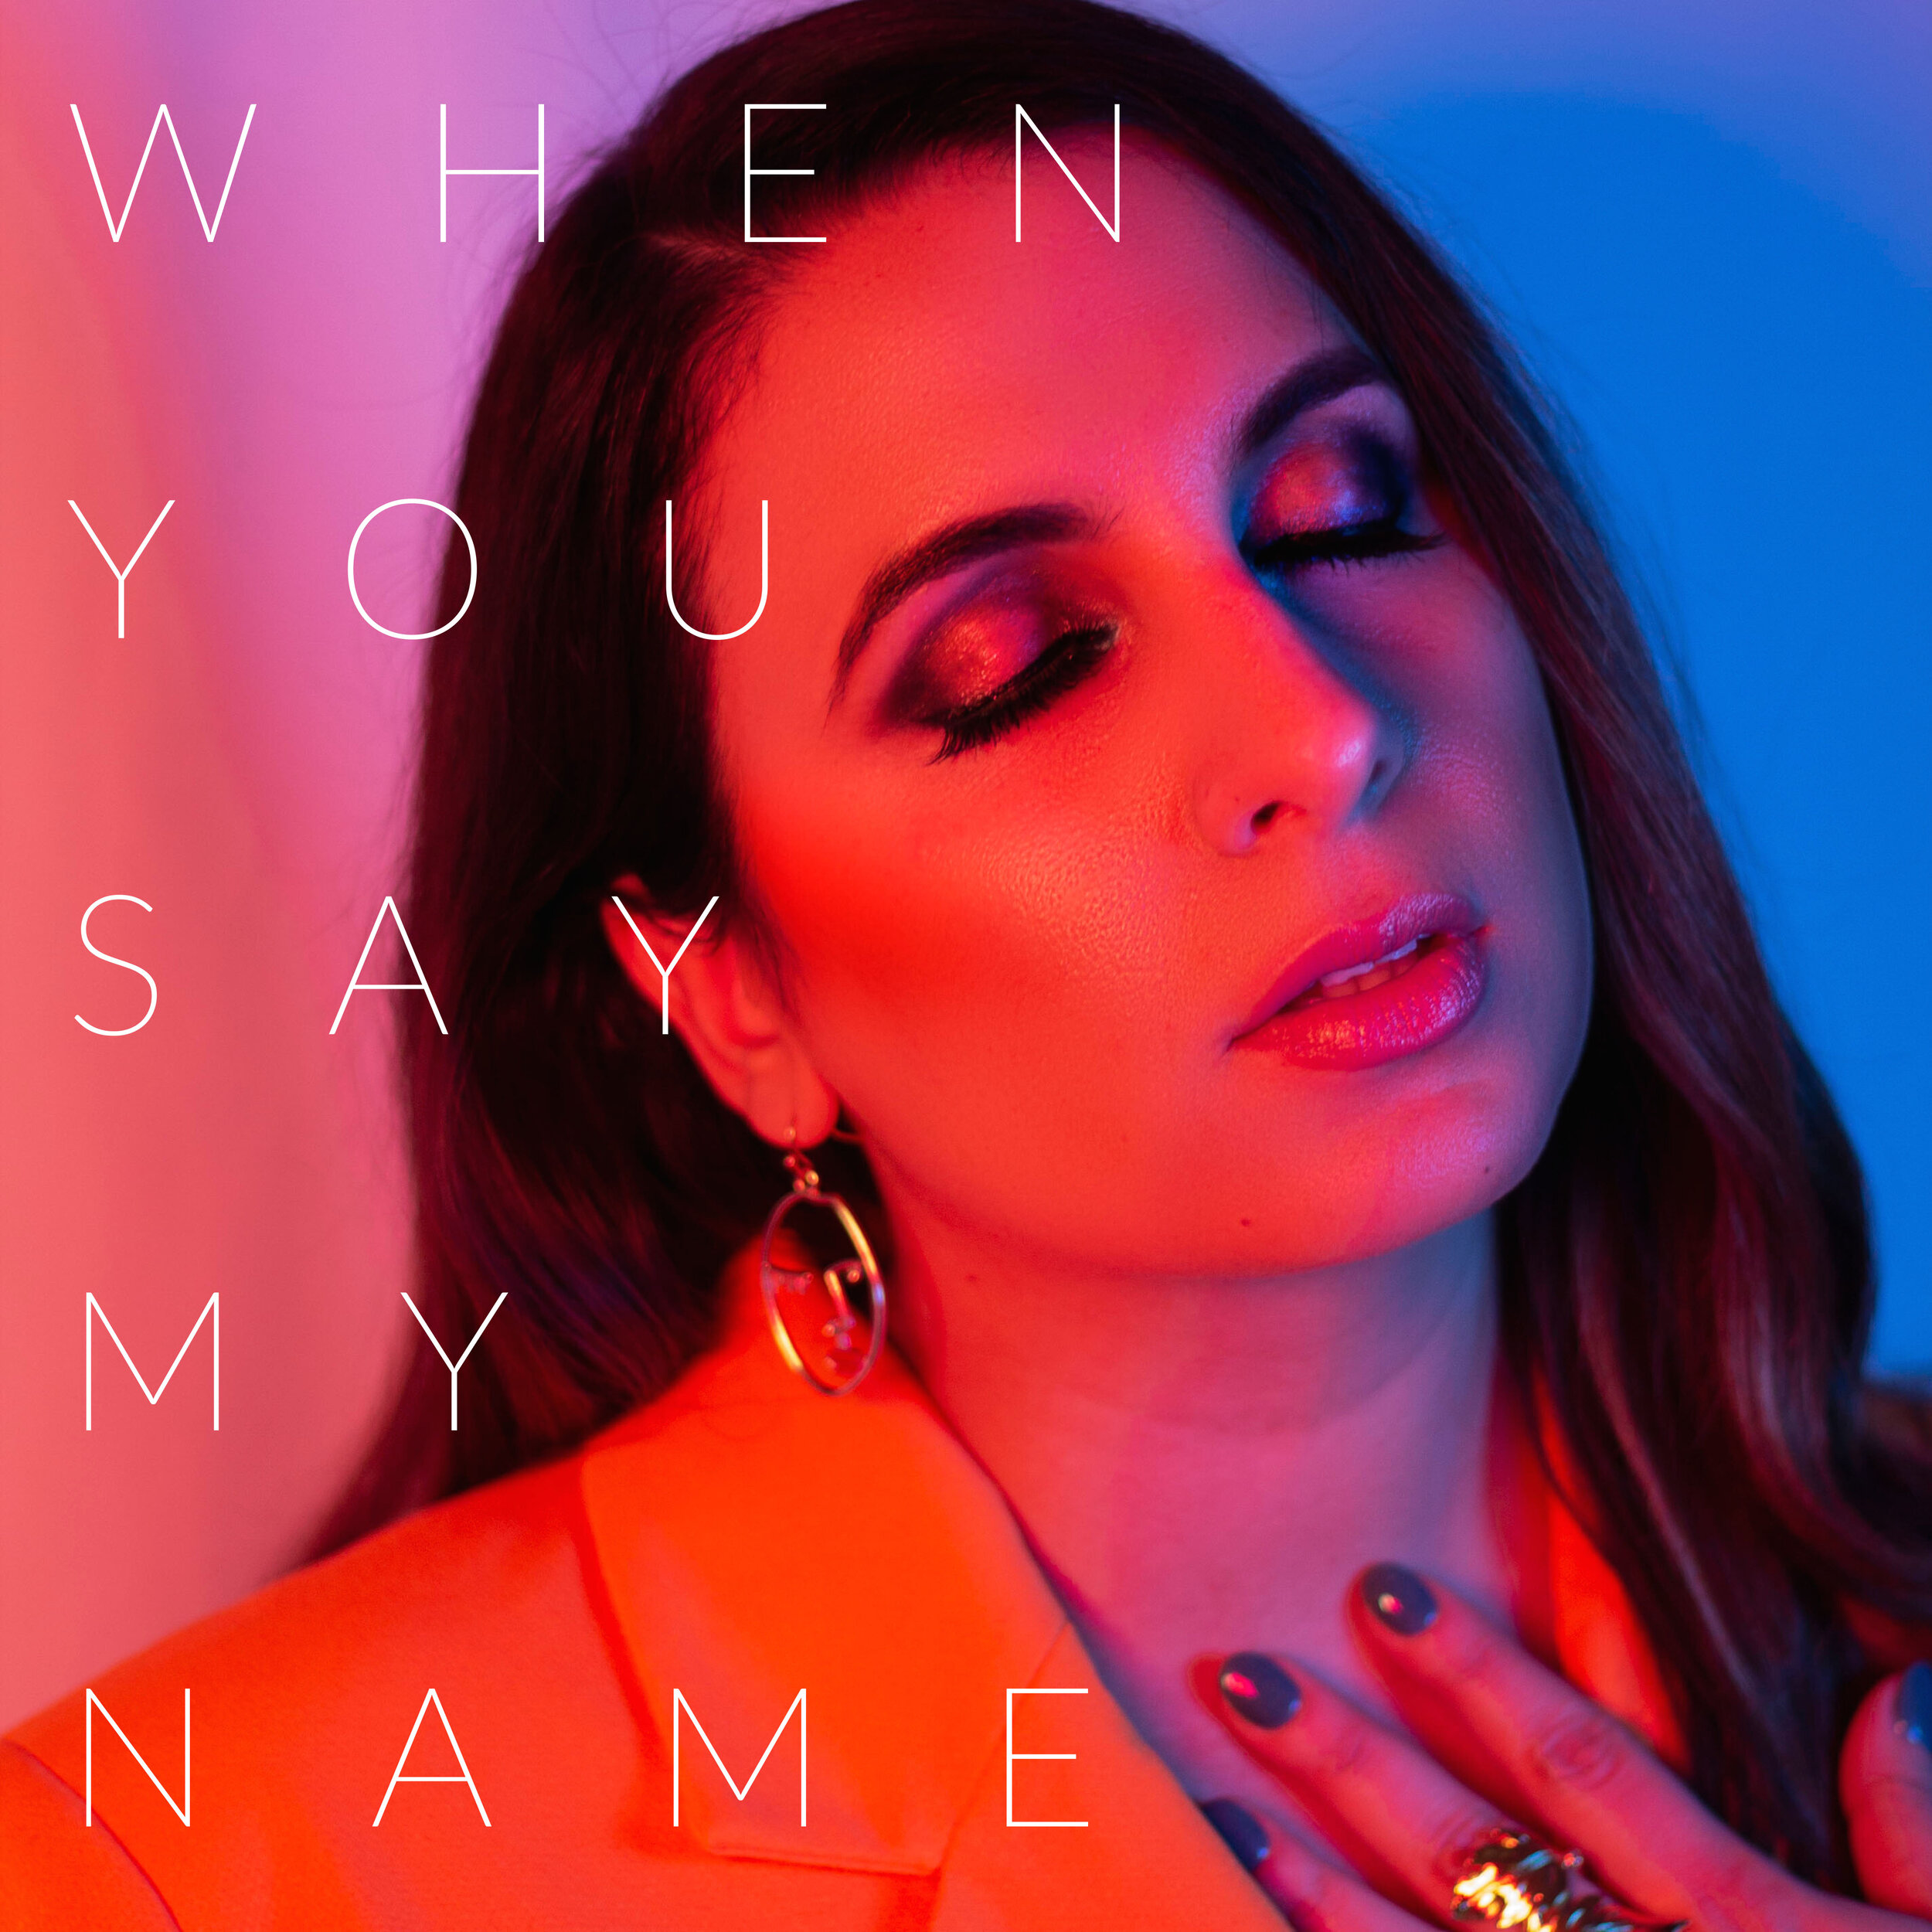 When you say my name Single Cover - Final Final .jpg